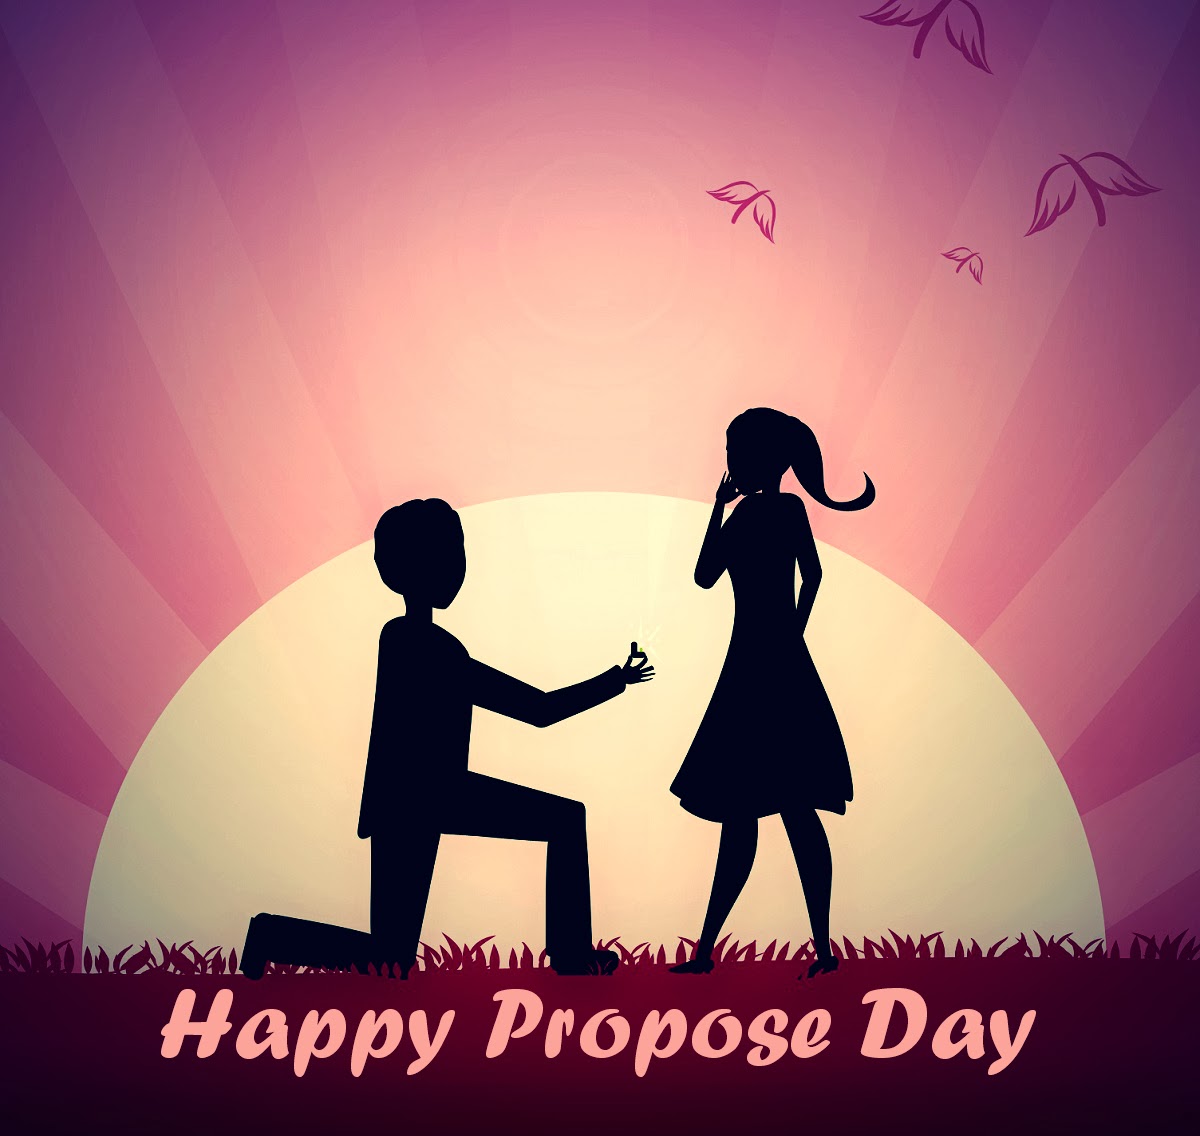 Propose Day Wallpaper And Proposal Image